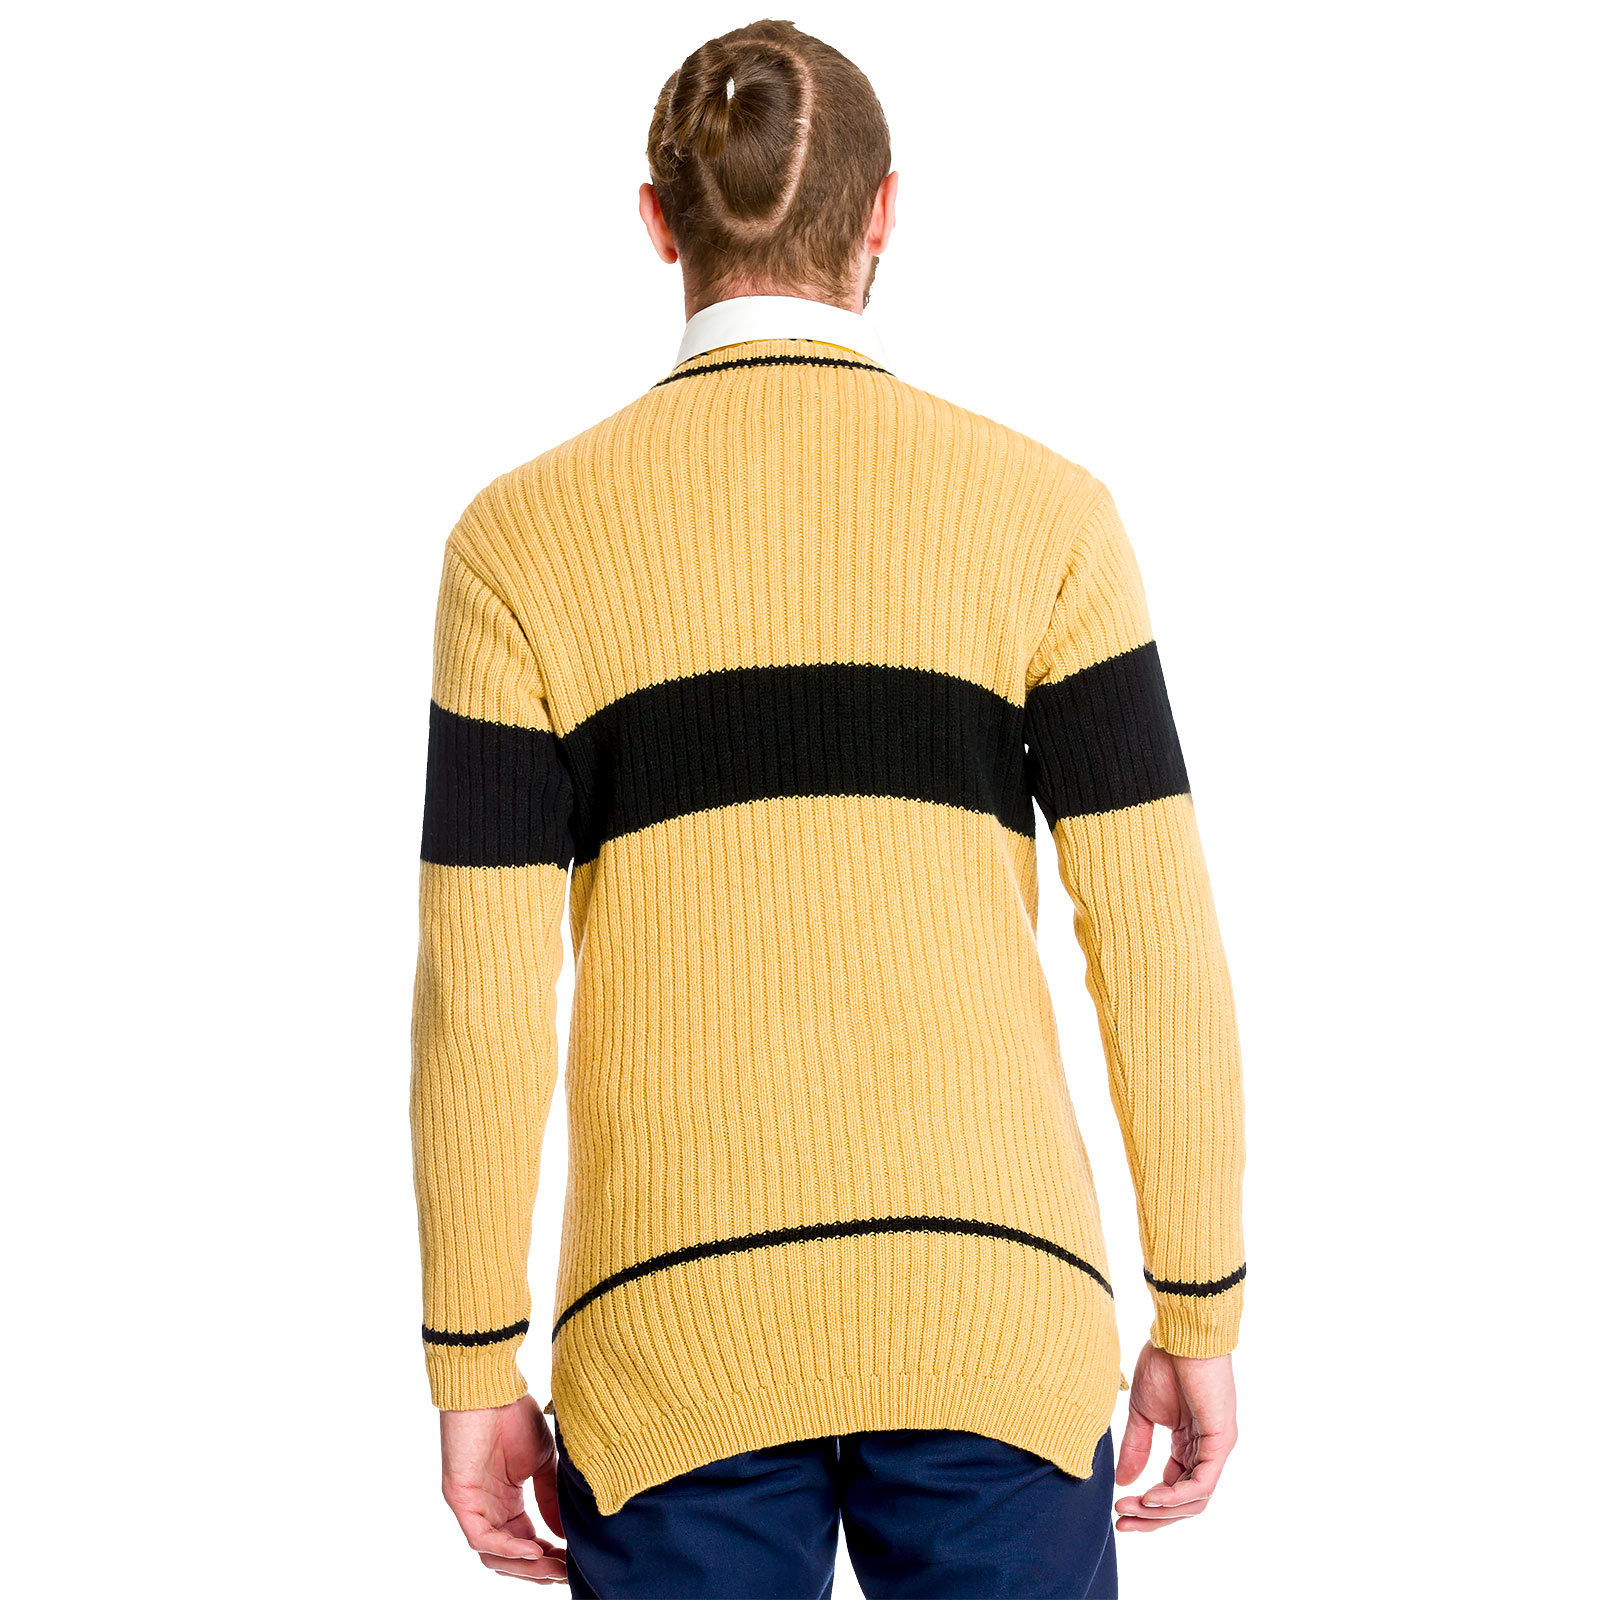 Harry Potter - Quidditch Sweater Hufflepuff